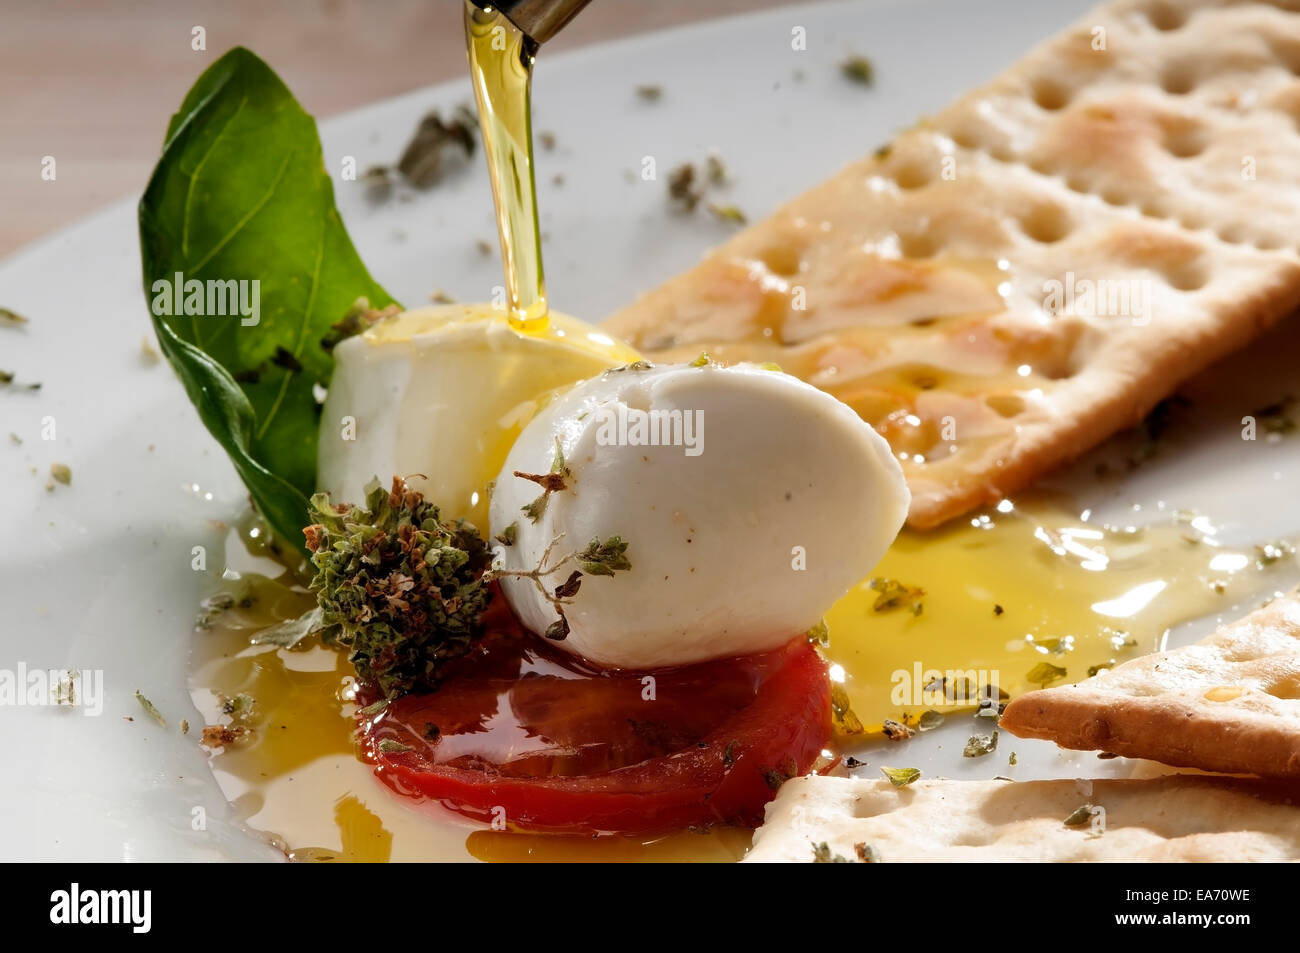 Caprese salad with buffalo milk mozzarella ,with olive oil, tomatoes and oregano. a typical Italian appetizer Stock Photo